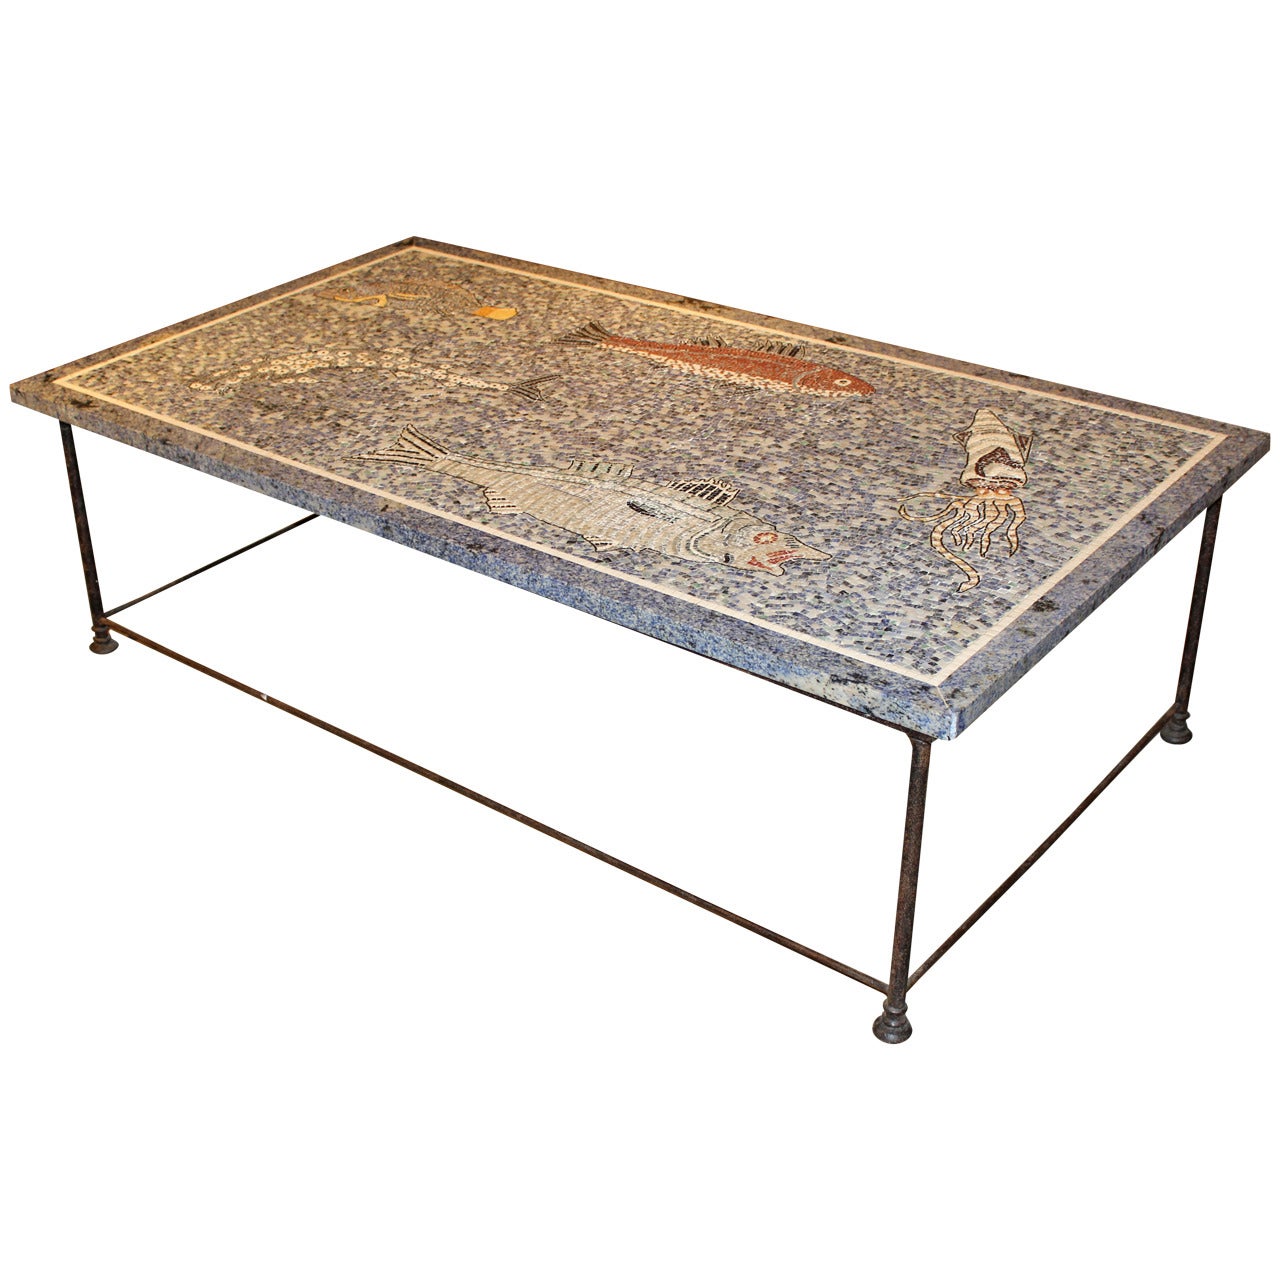 Large Lapis and Stone Mosaic Coffee Table with Ocean Motif